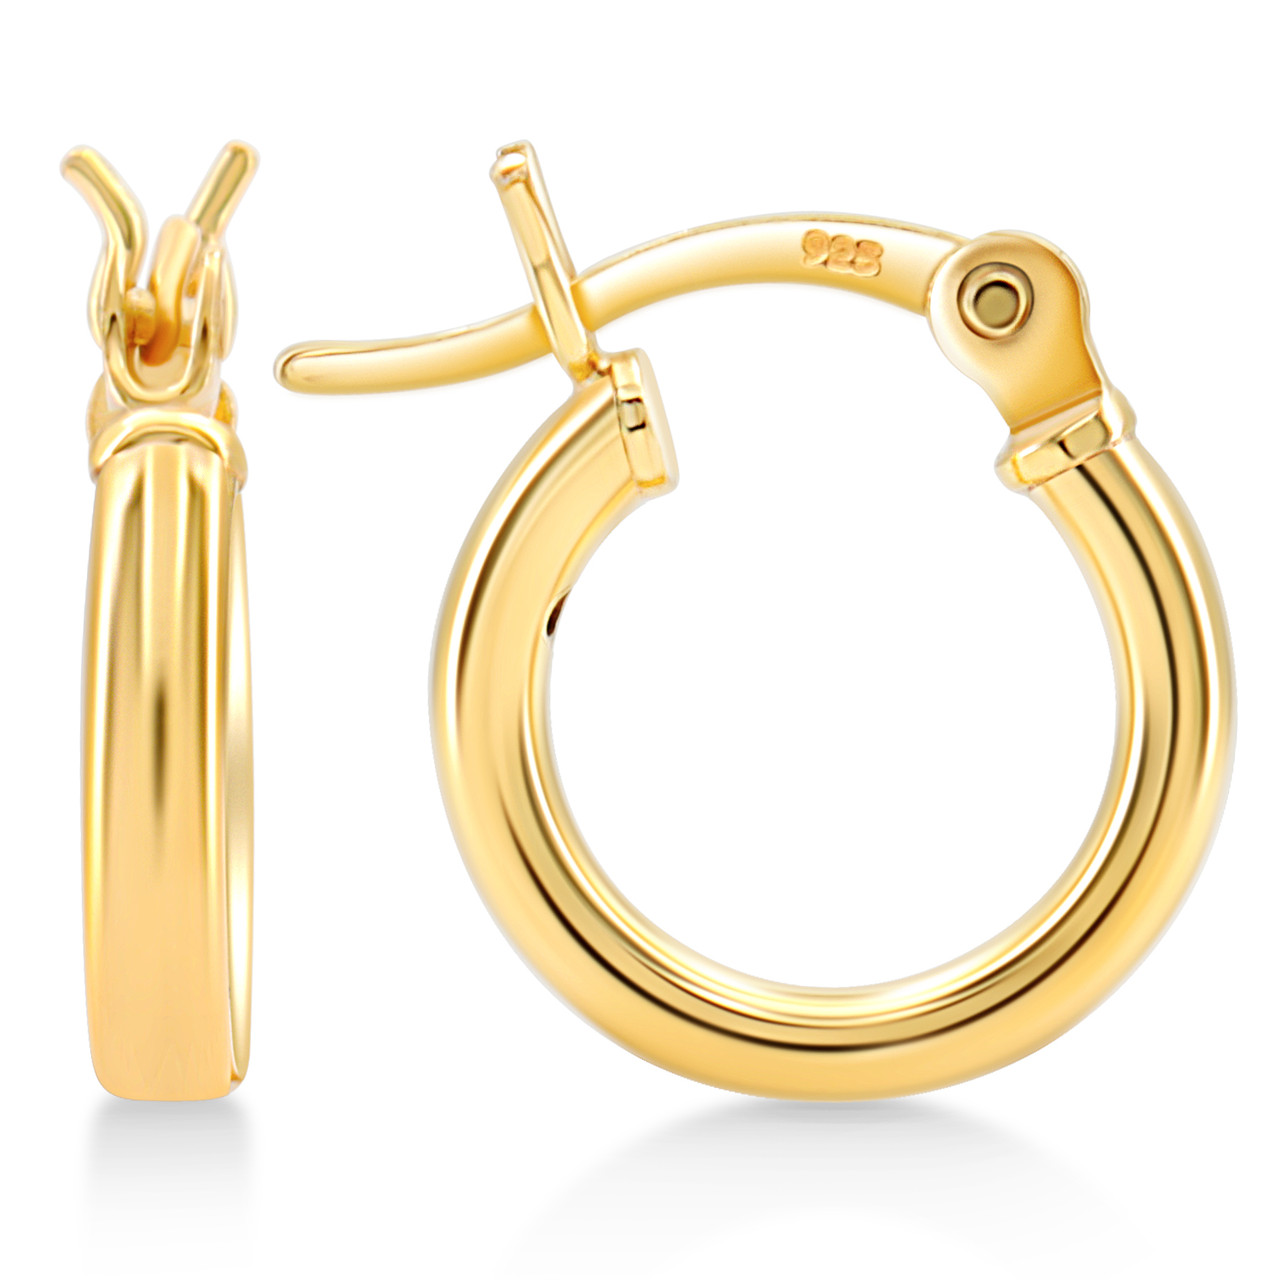 Yellow enamel round hoop earrings with clasp, sterling silver 925, KL-415  SM 3,8x14,8 mm col. 07 - SILVEXCRAFT